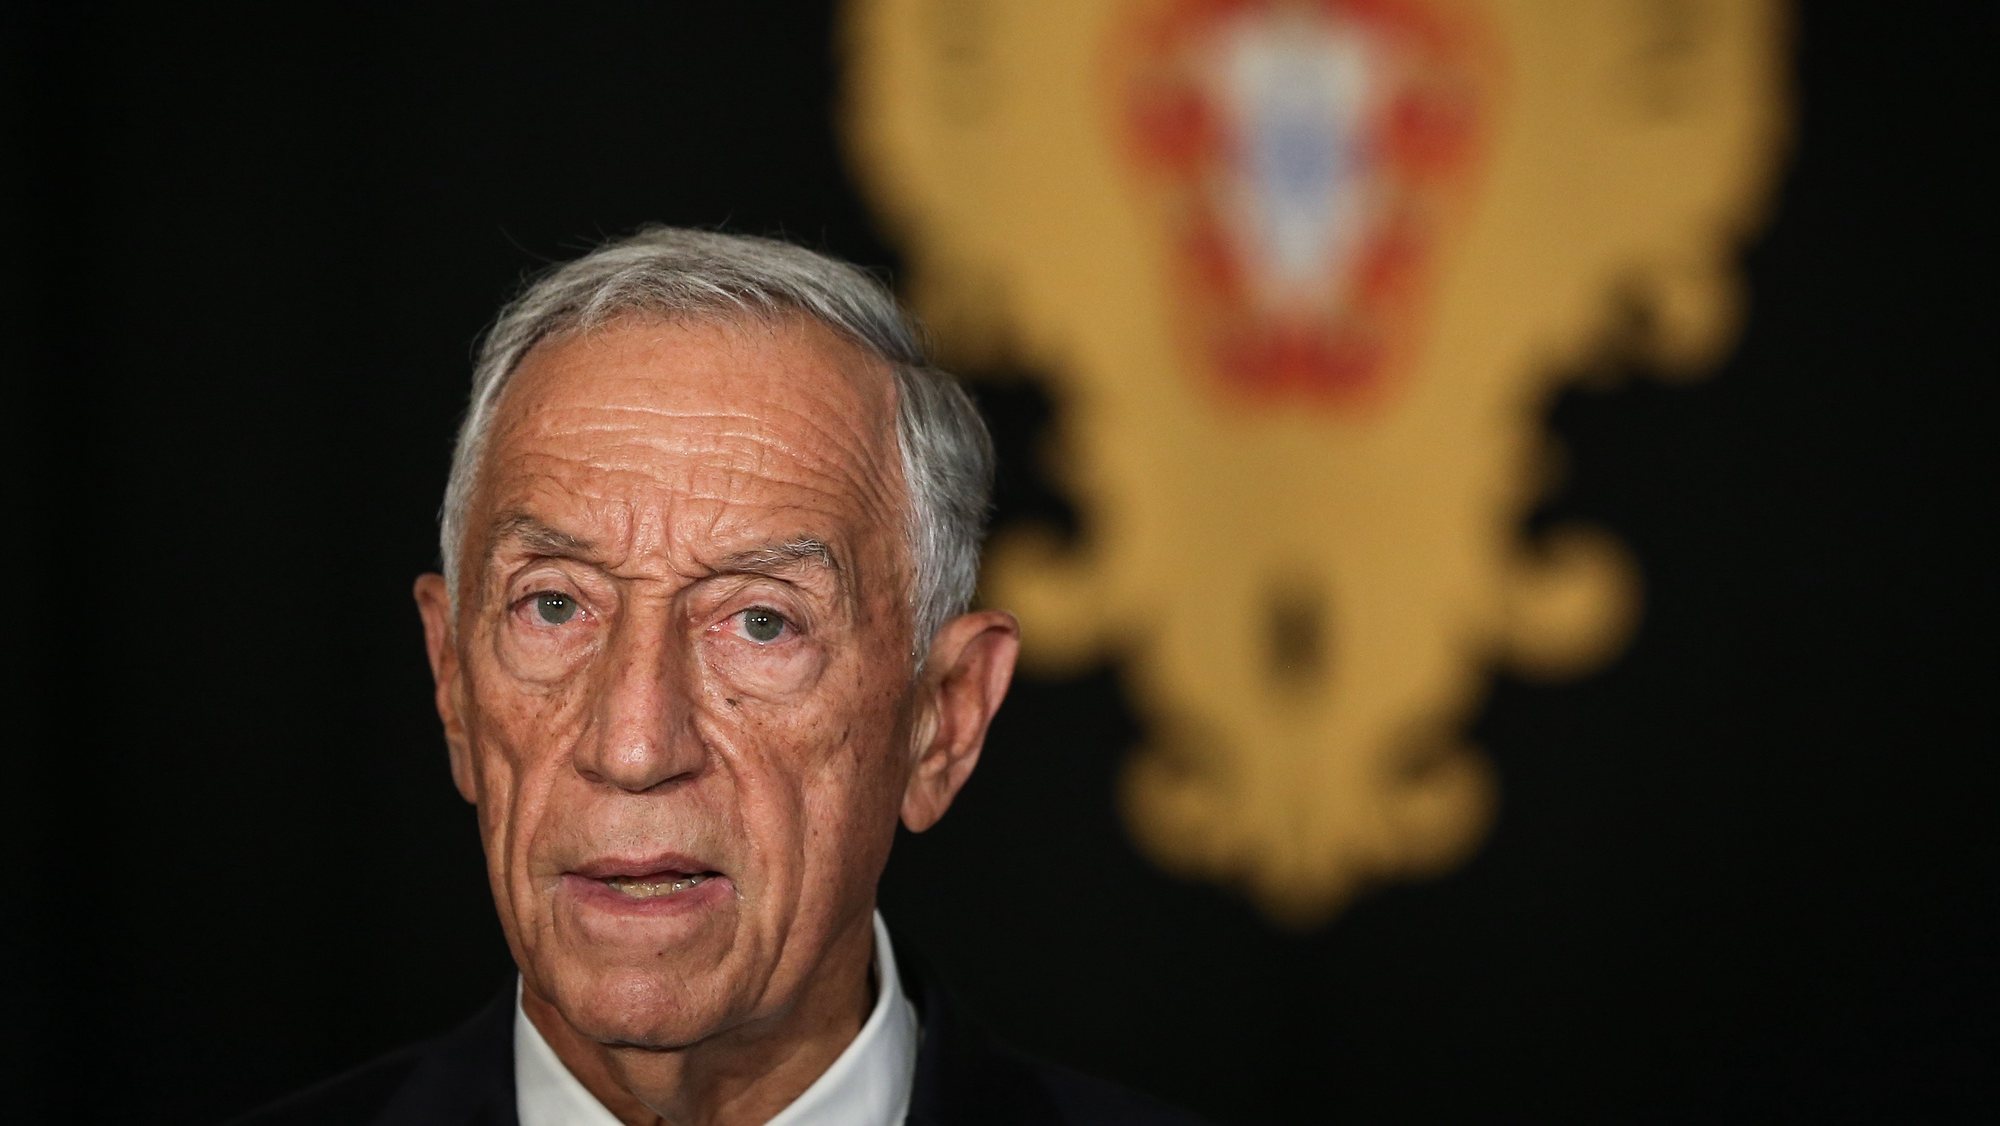 Portugal&#039;s President Marcelo Rebelo de Sousa speaks to journalists after receiving the ambassador of Ukraine in Portugal Inna Ohnivets (not seen) at the Belem Palace, Lisbon, Portiugal, 24 February 2022. Russia began a large-scale attack on Ukraine, with explosions reported in multiple cities and far outside the restive eastern regions held by Russian-backed rebels. RODRIGO ANTUNES/LUSA